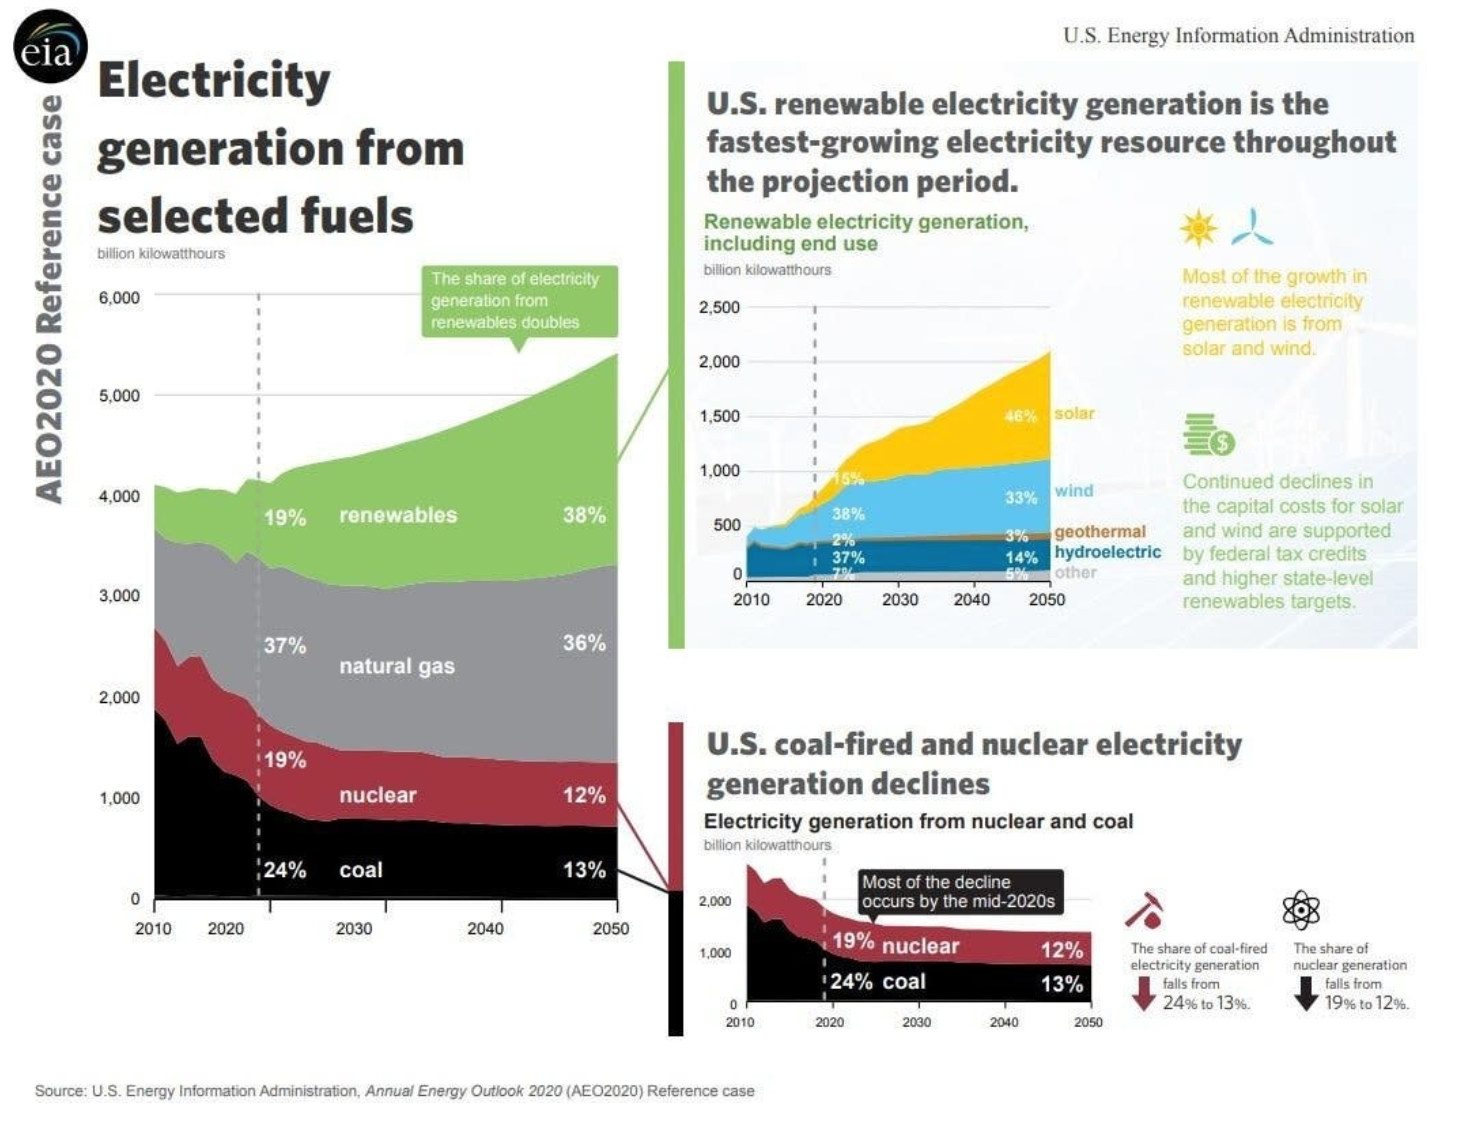 Figure 1: Image of energy growth historically and projected through 2050 from IEA
